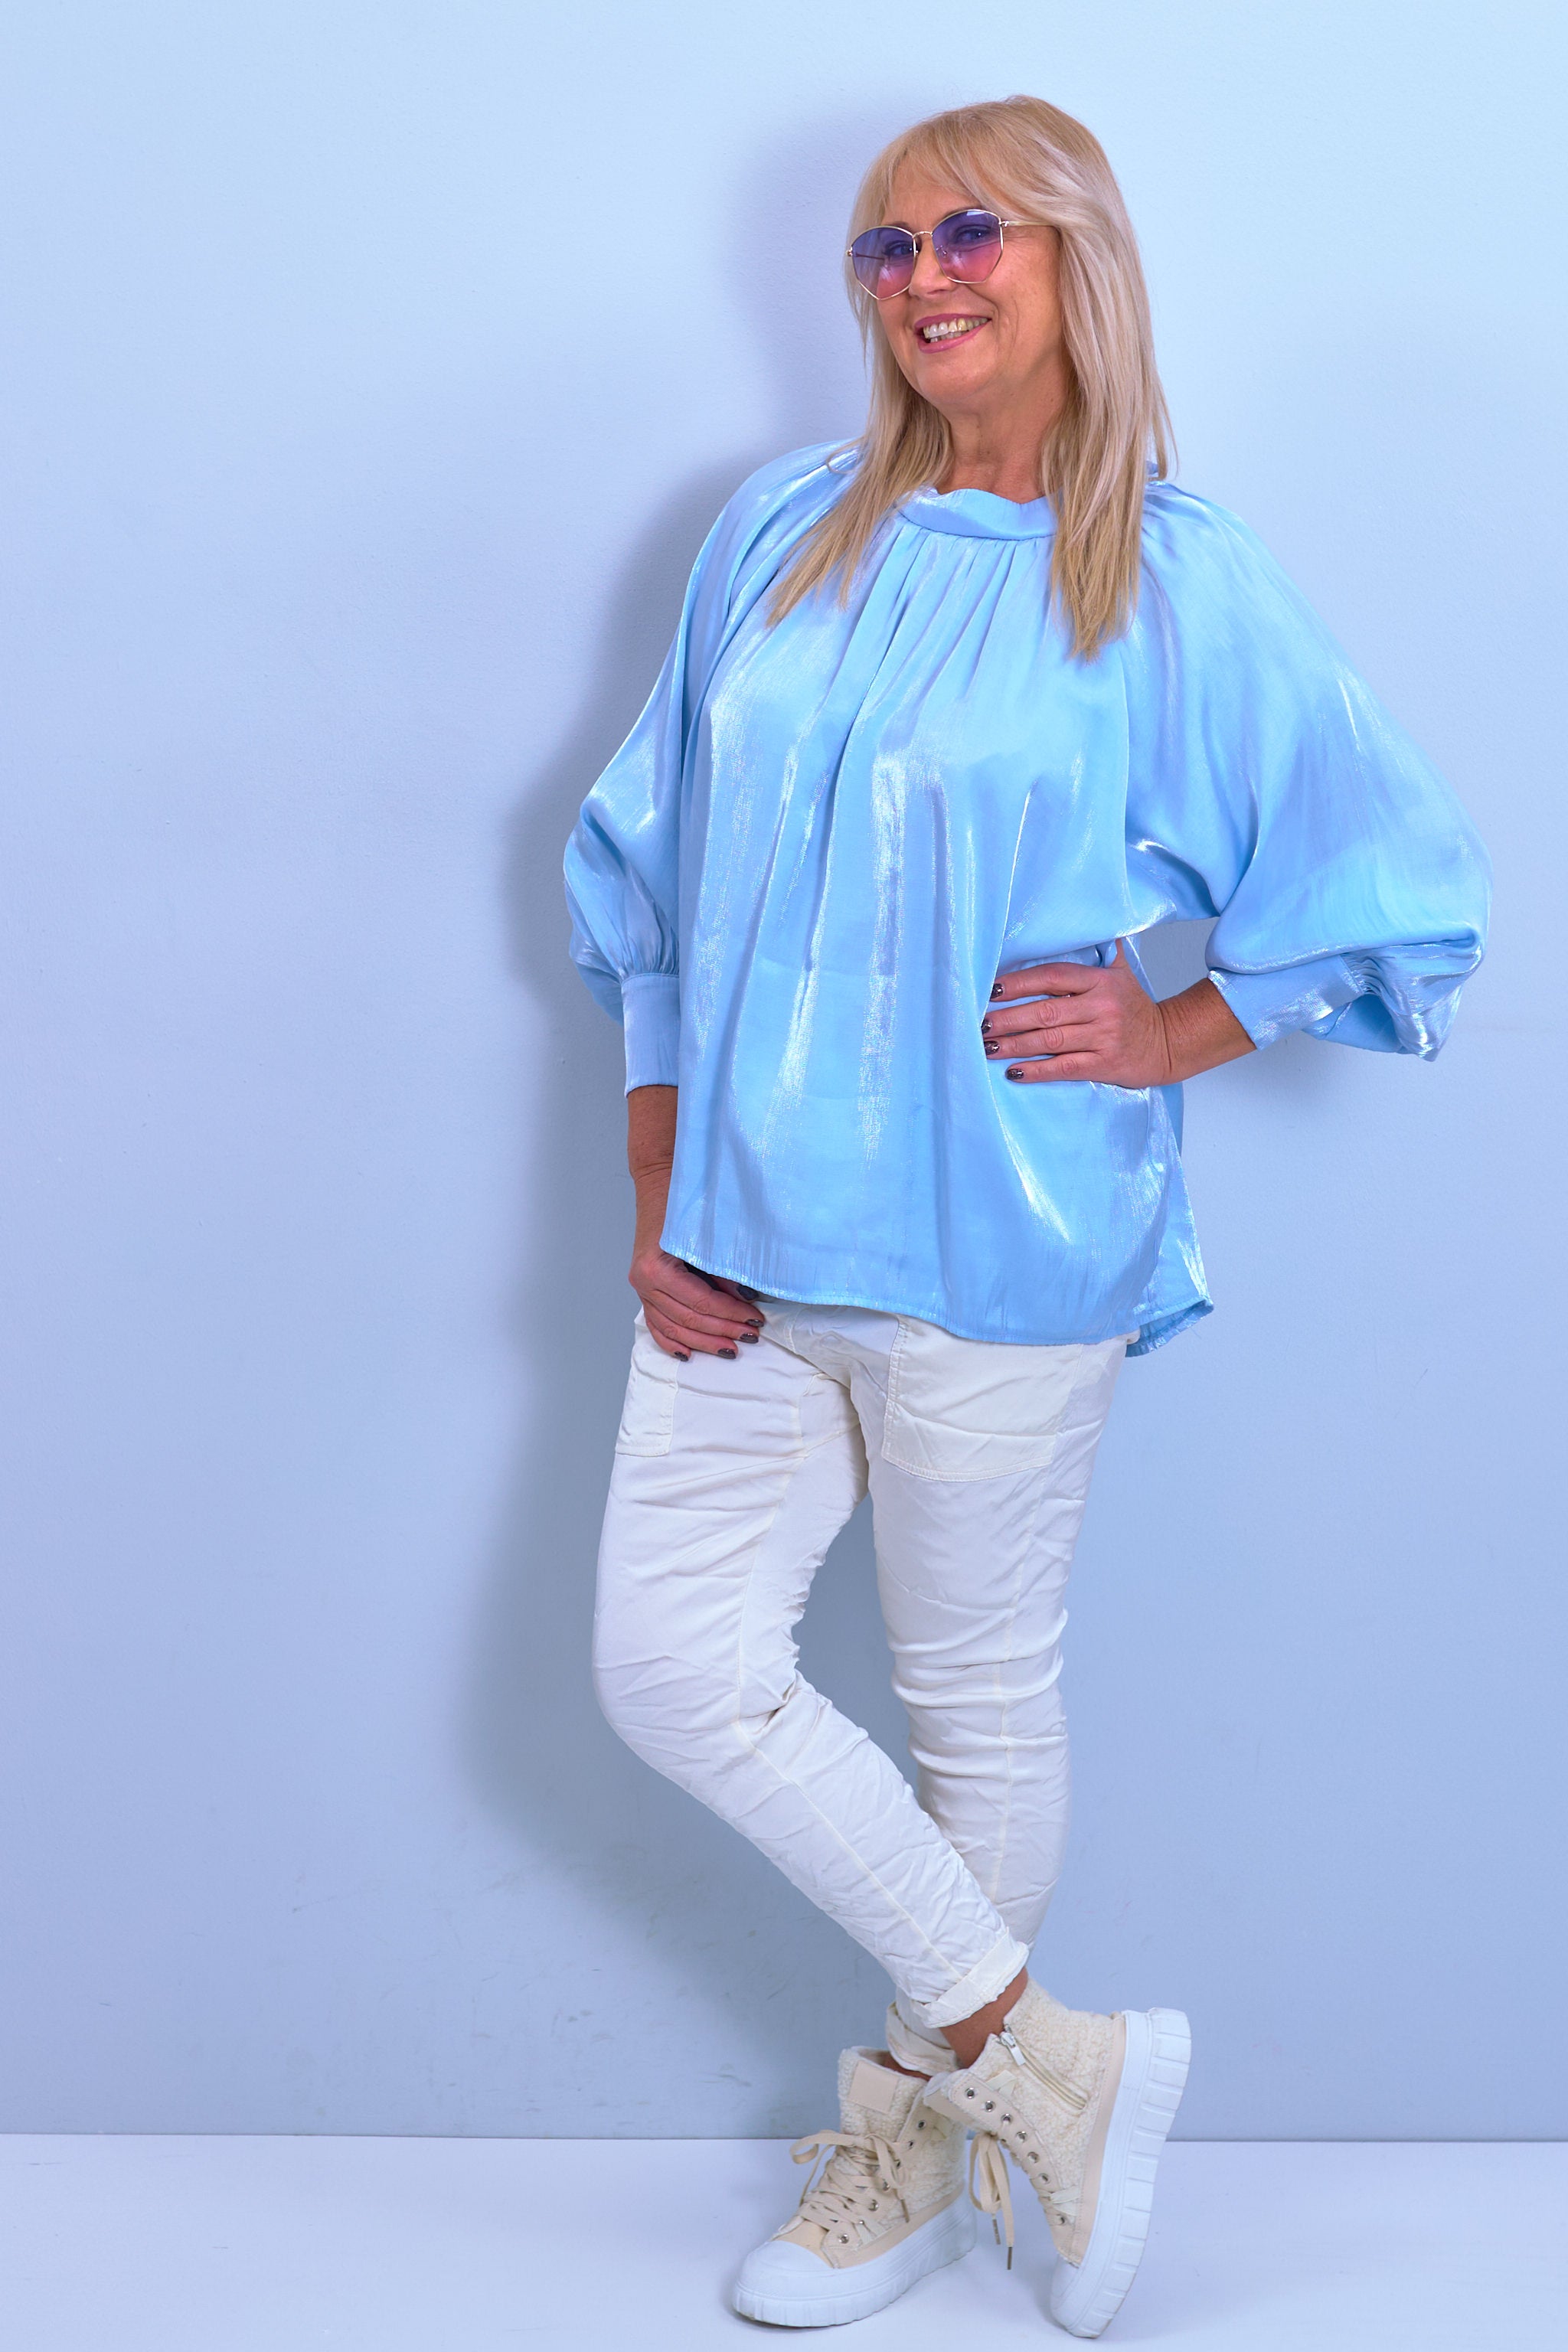 Blouse made of shiny fabric with a bow, light blue